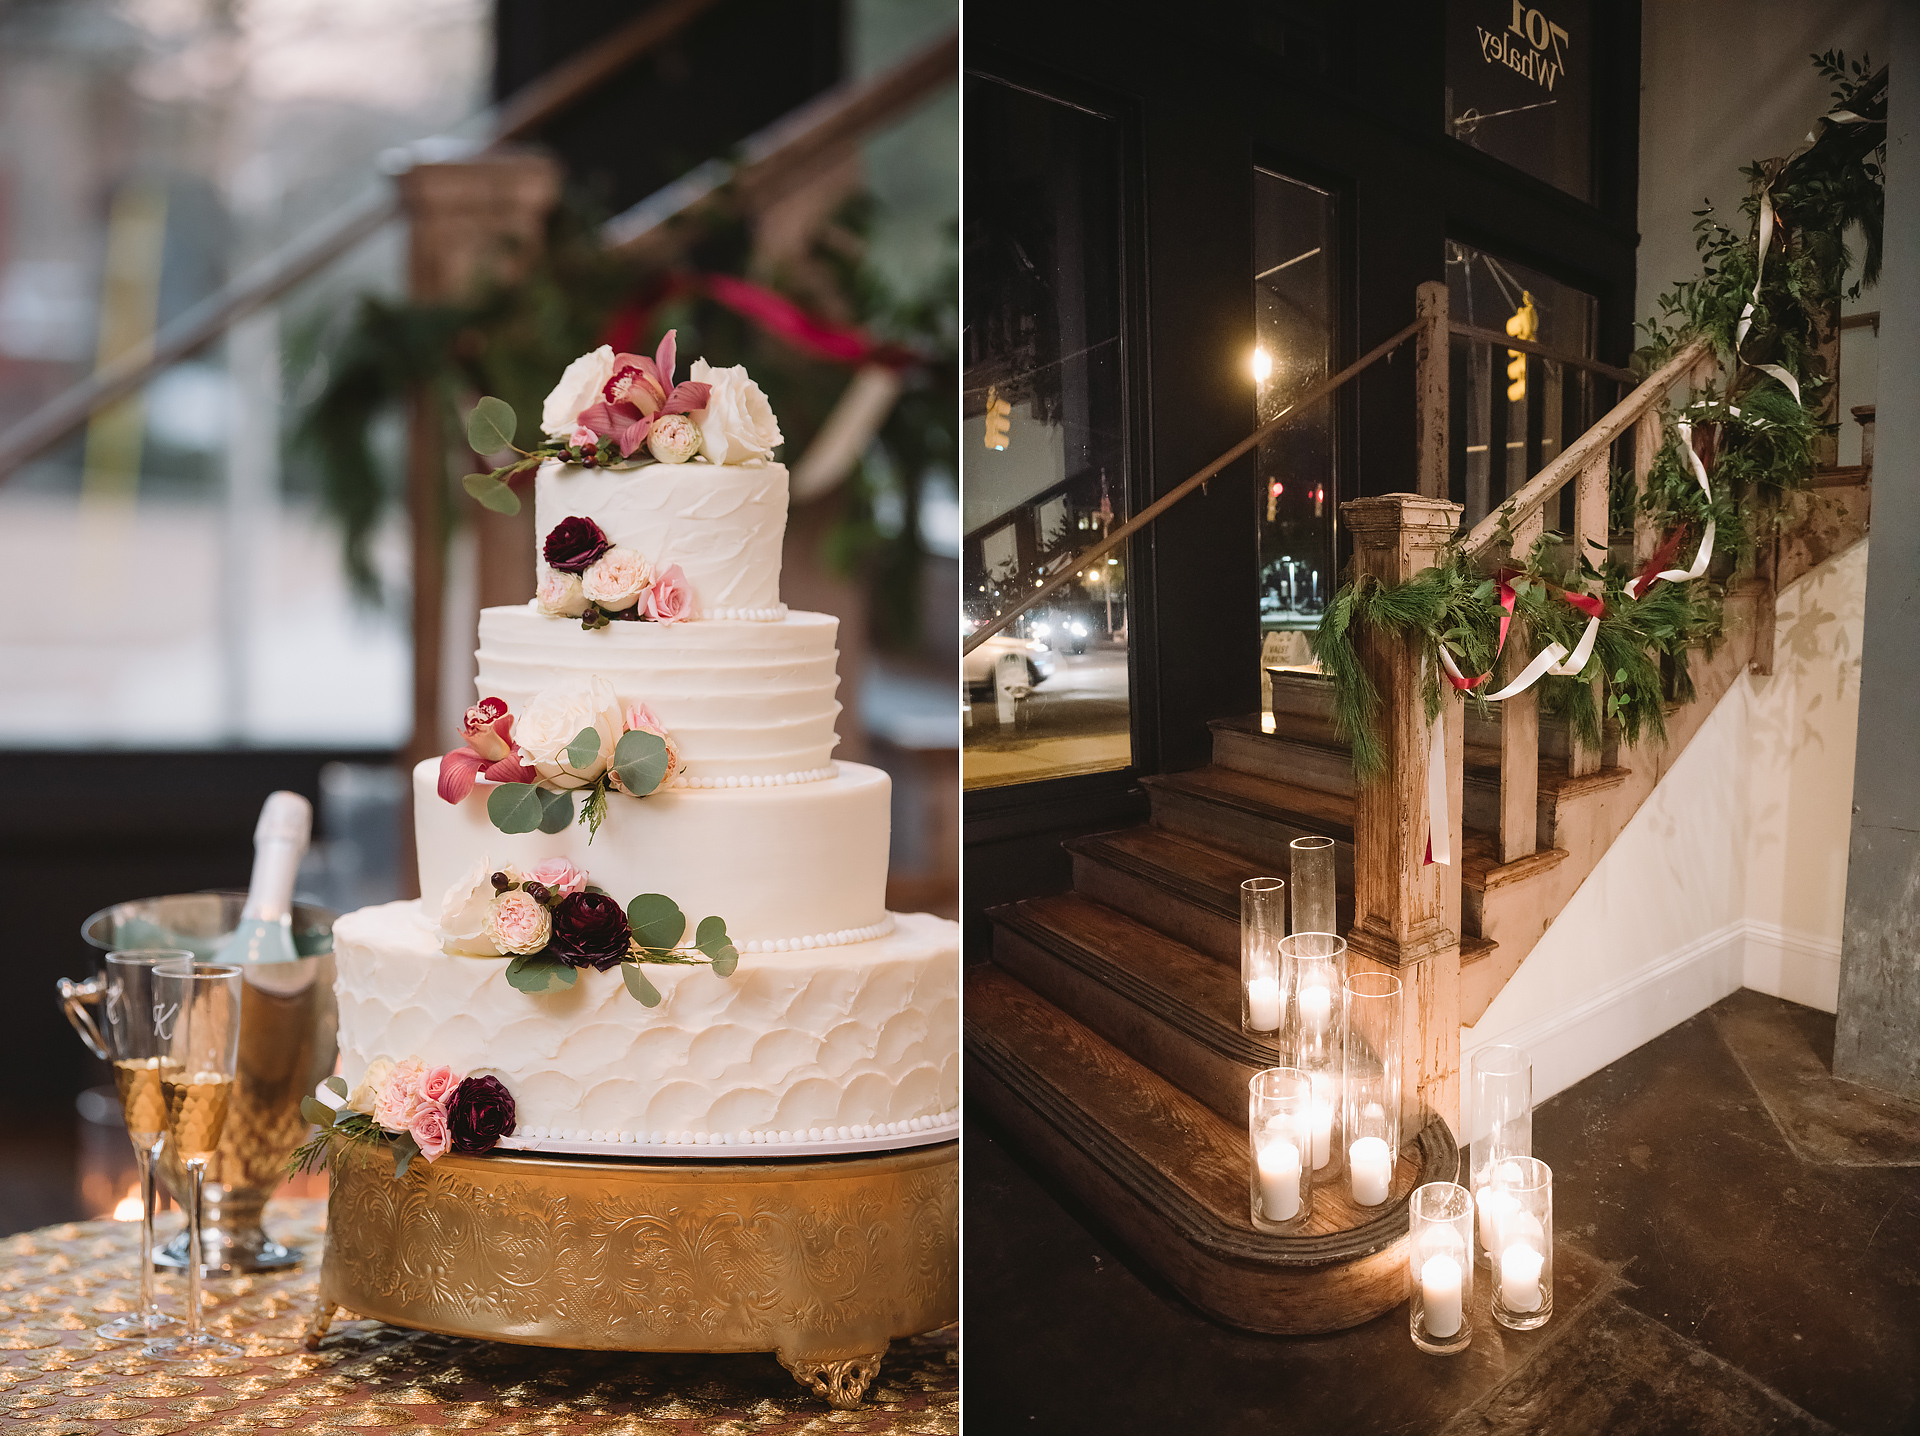  Candle-lit Cake and Stairs / 701 Whaley / Columbia SC 